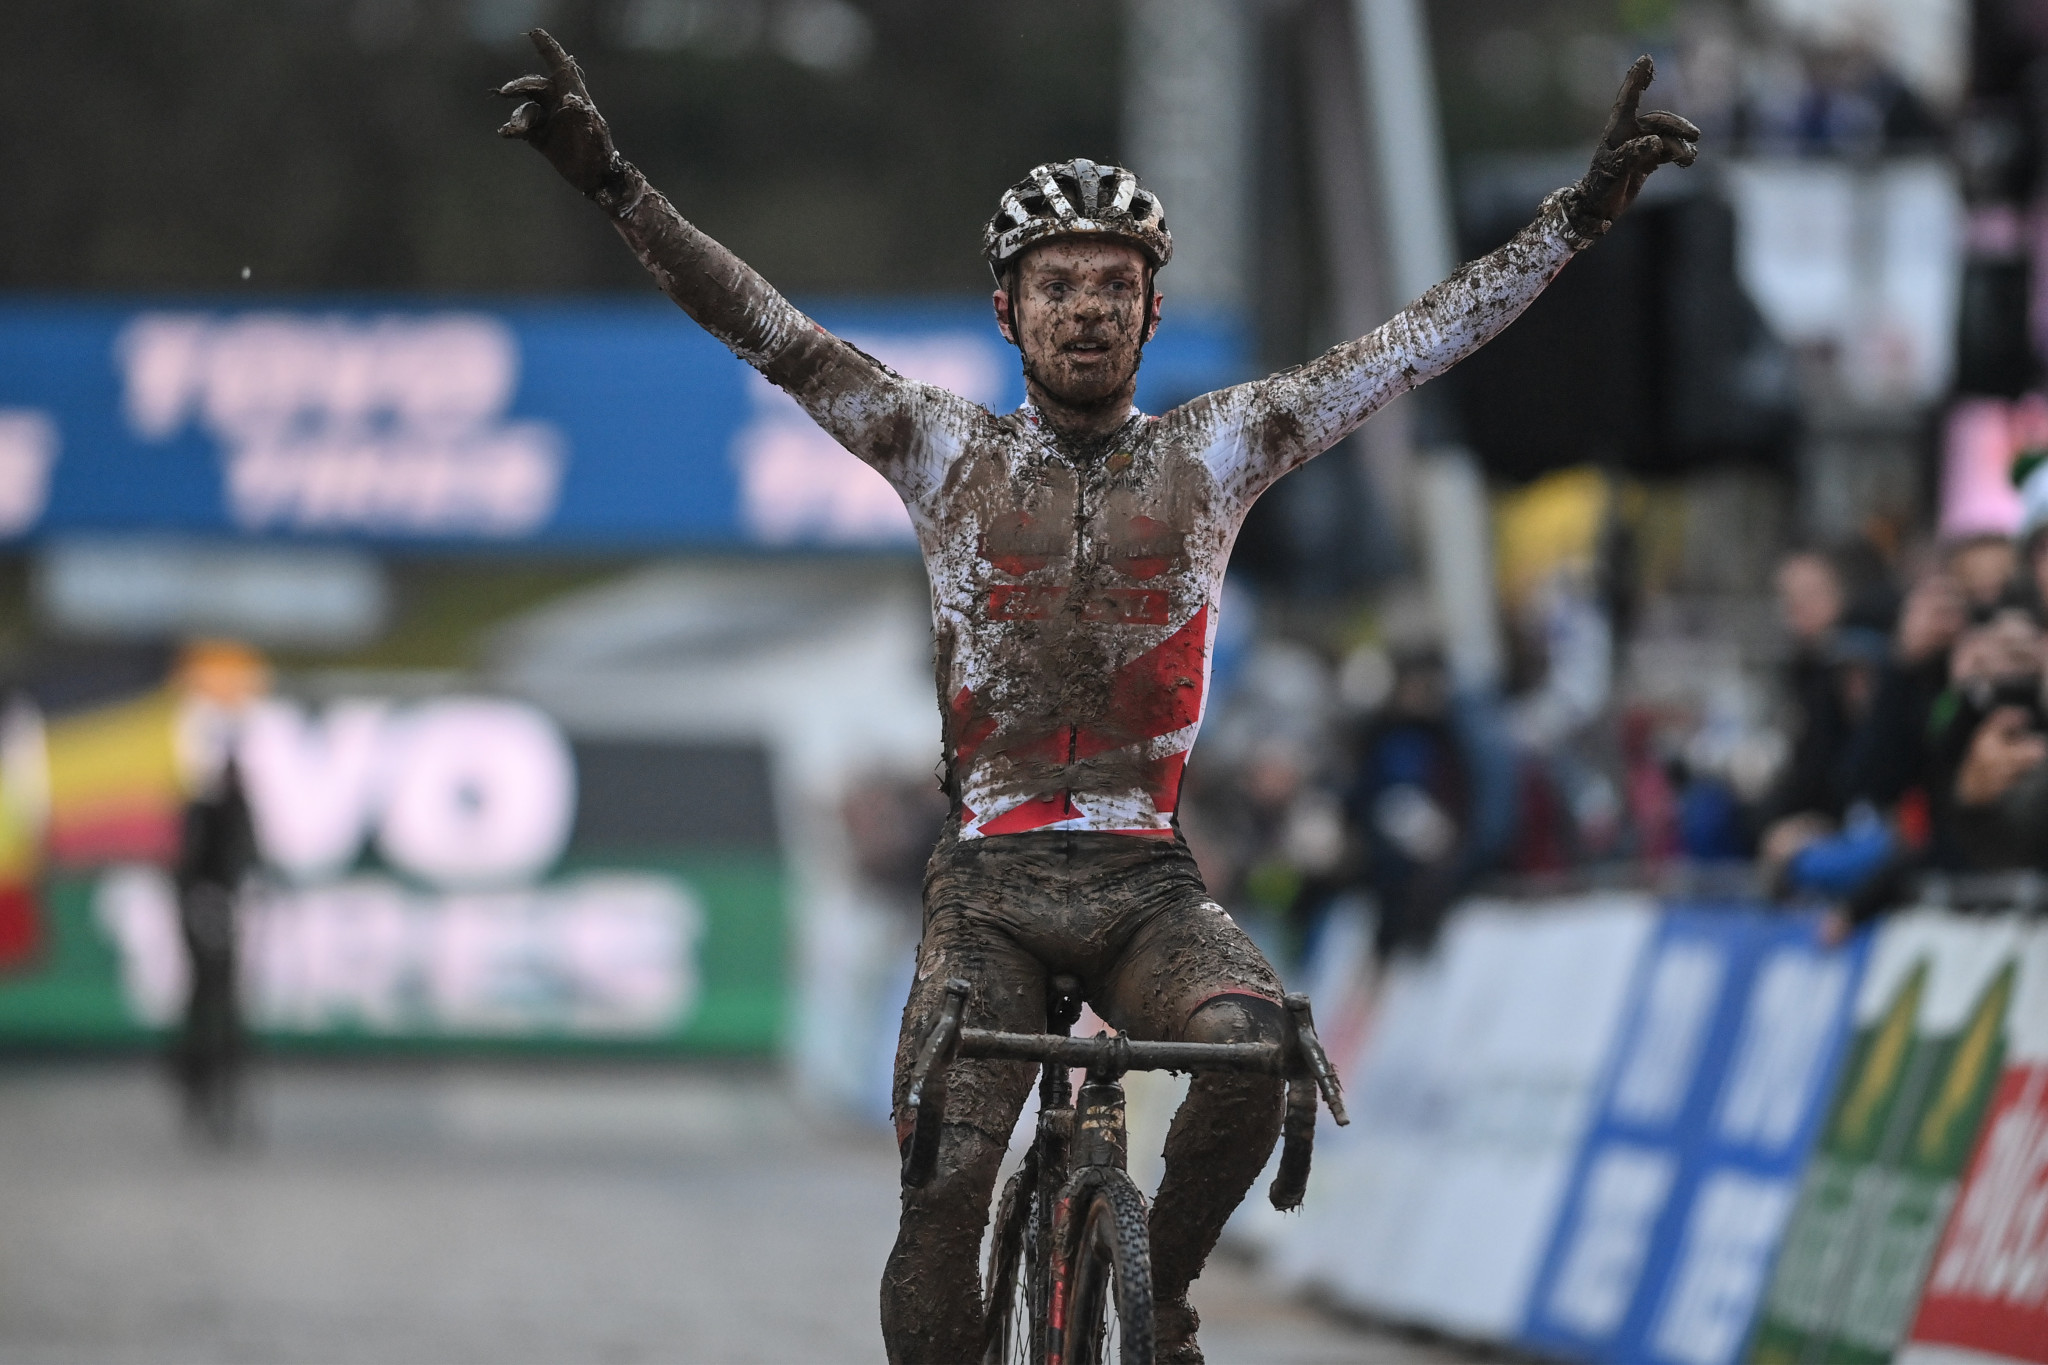 Eli Iserbyt celebrates after winning the men's title at the Cyclo-cross World Cup in Besançon ©Getty Images